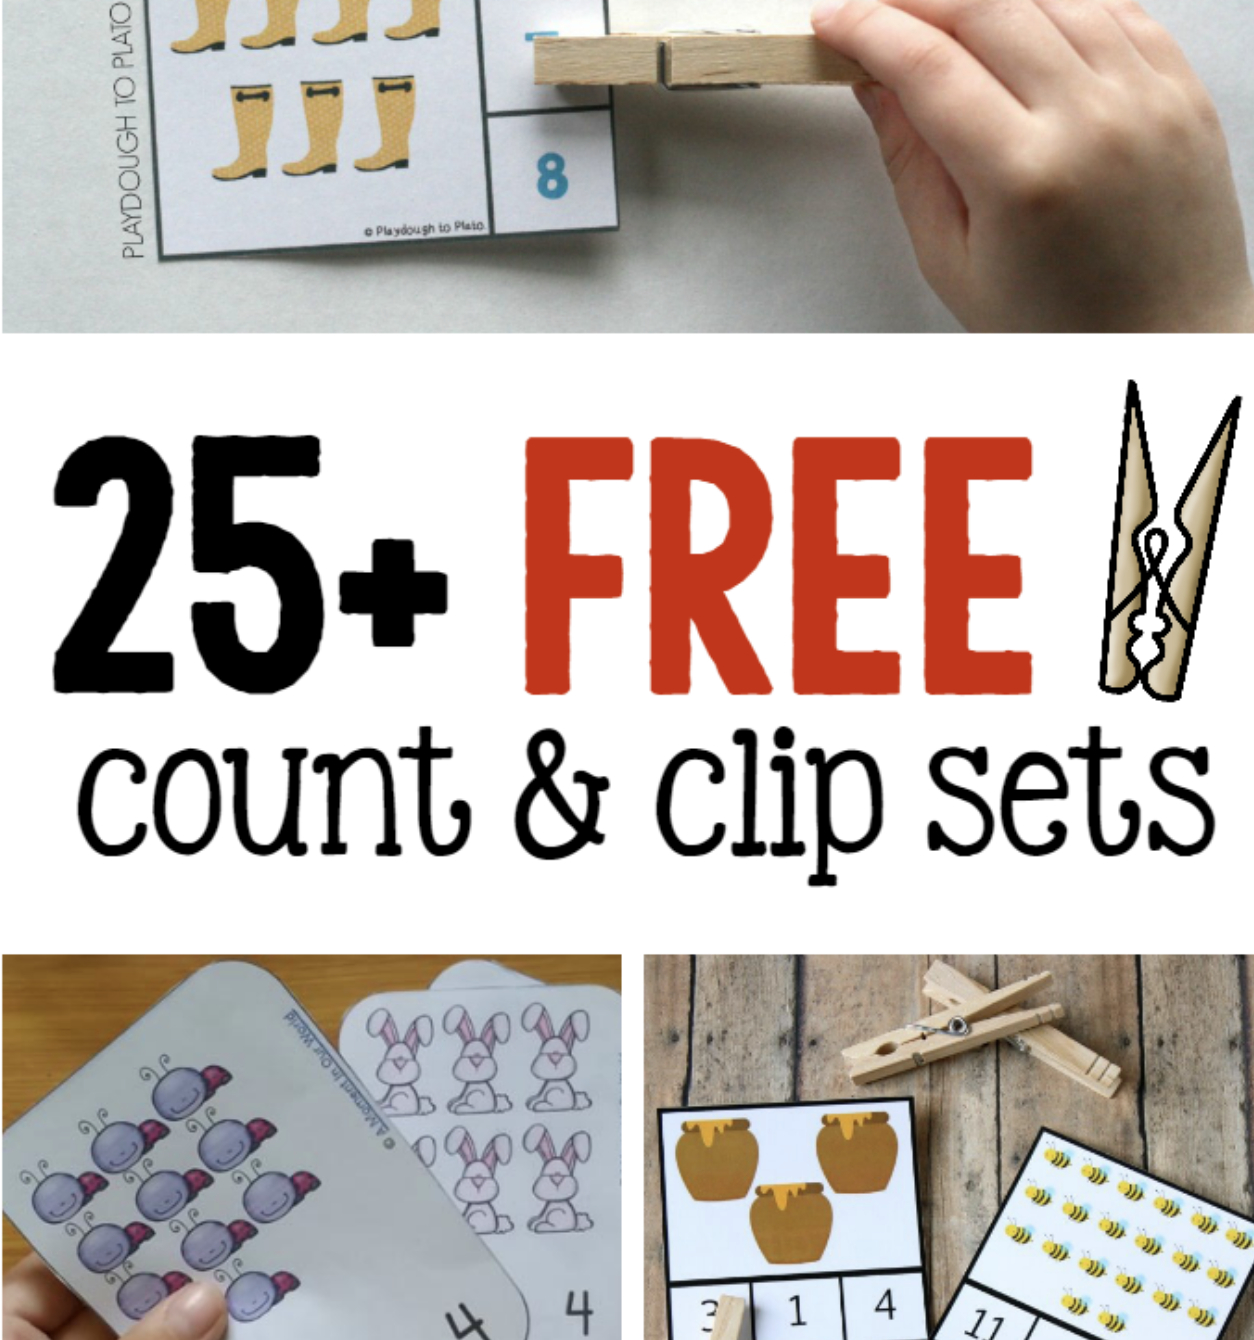 25+ Sets Of Count And Clip Cards - The Measured Mom - Free Printable Clip Cards